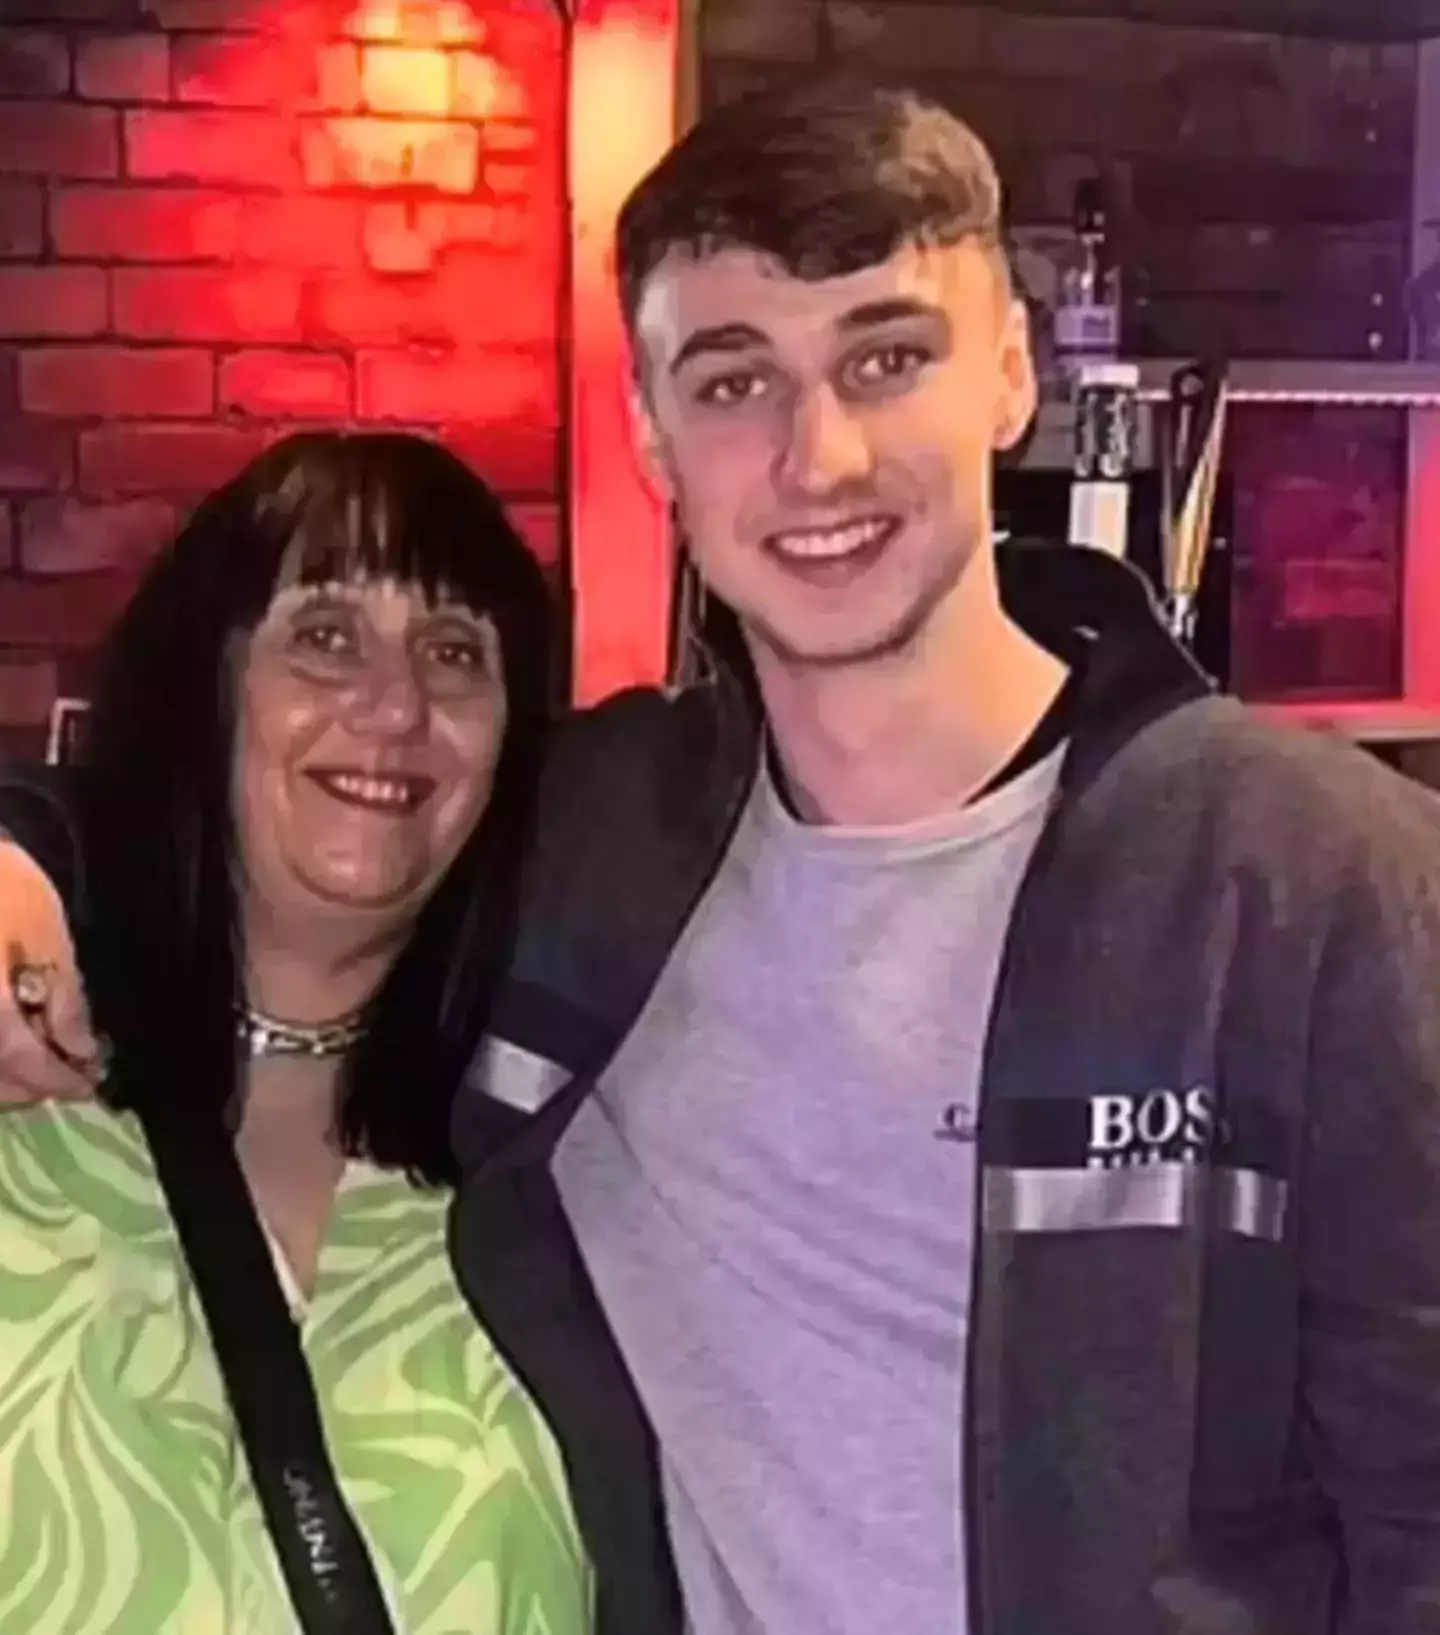 Jay's mum Debbie has since flown to the island as her son remains missing. (Family Handout)